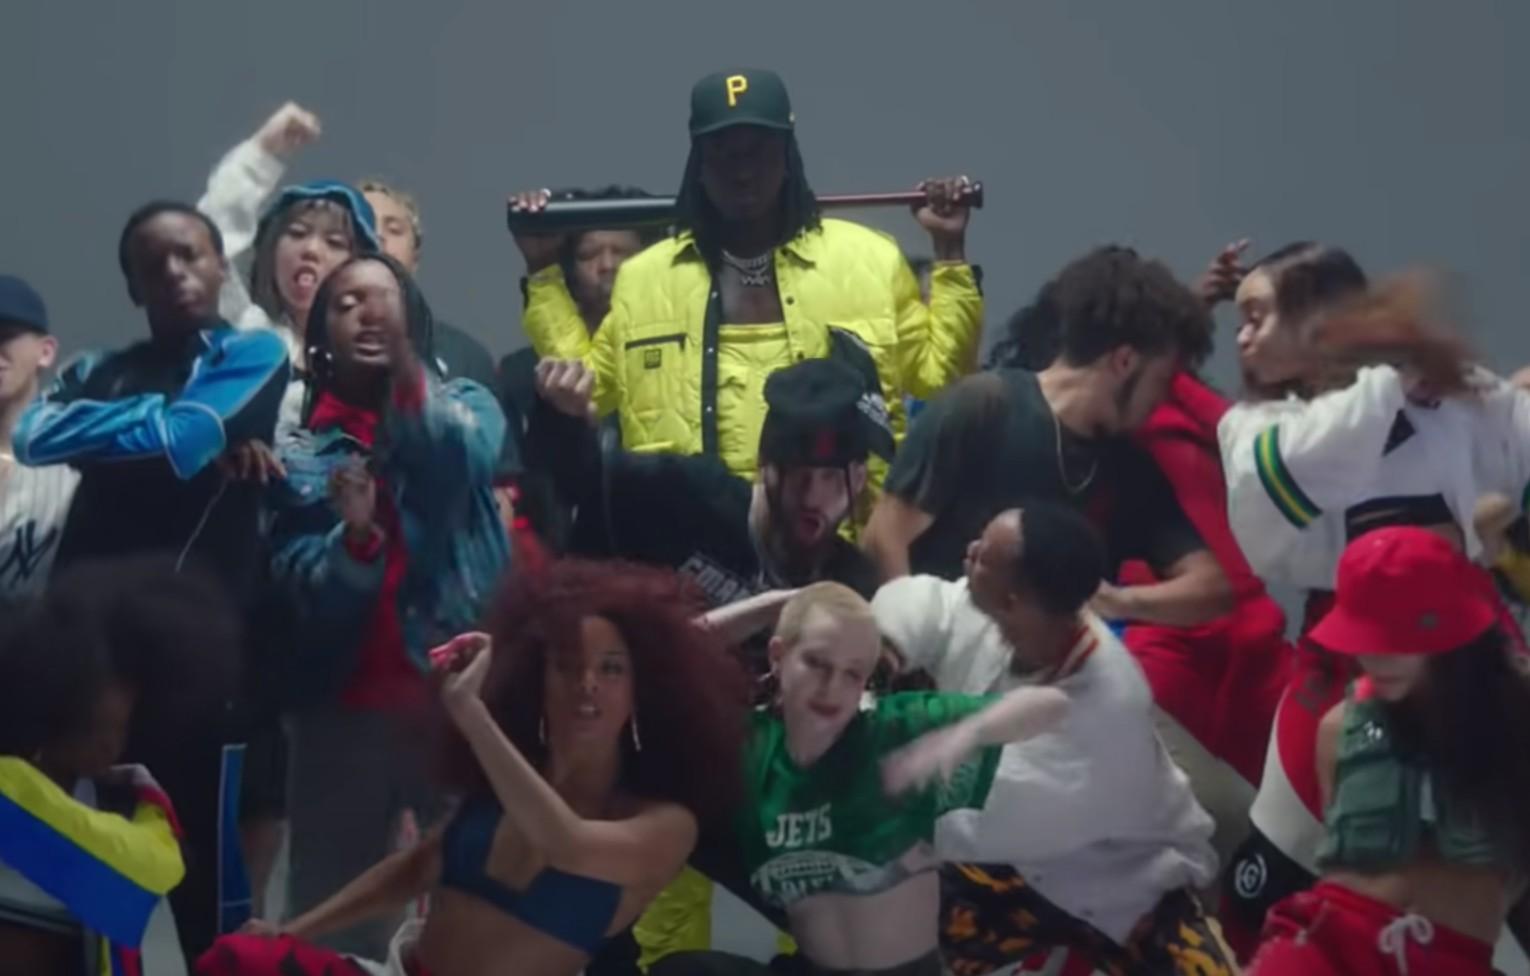 K Camp in the music video for Renegade